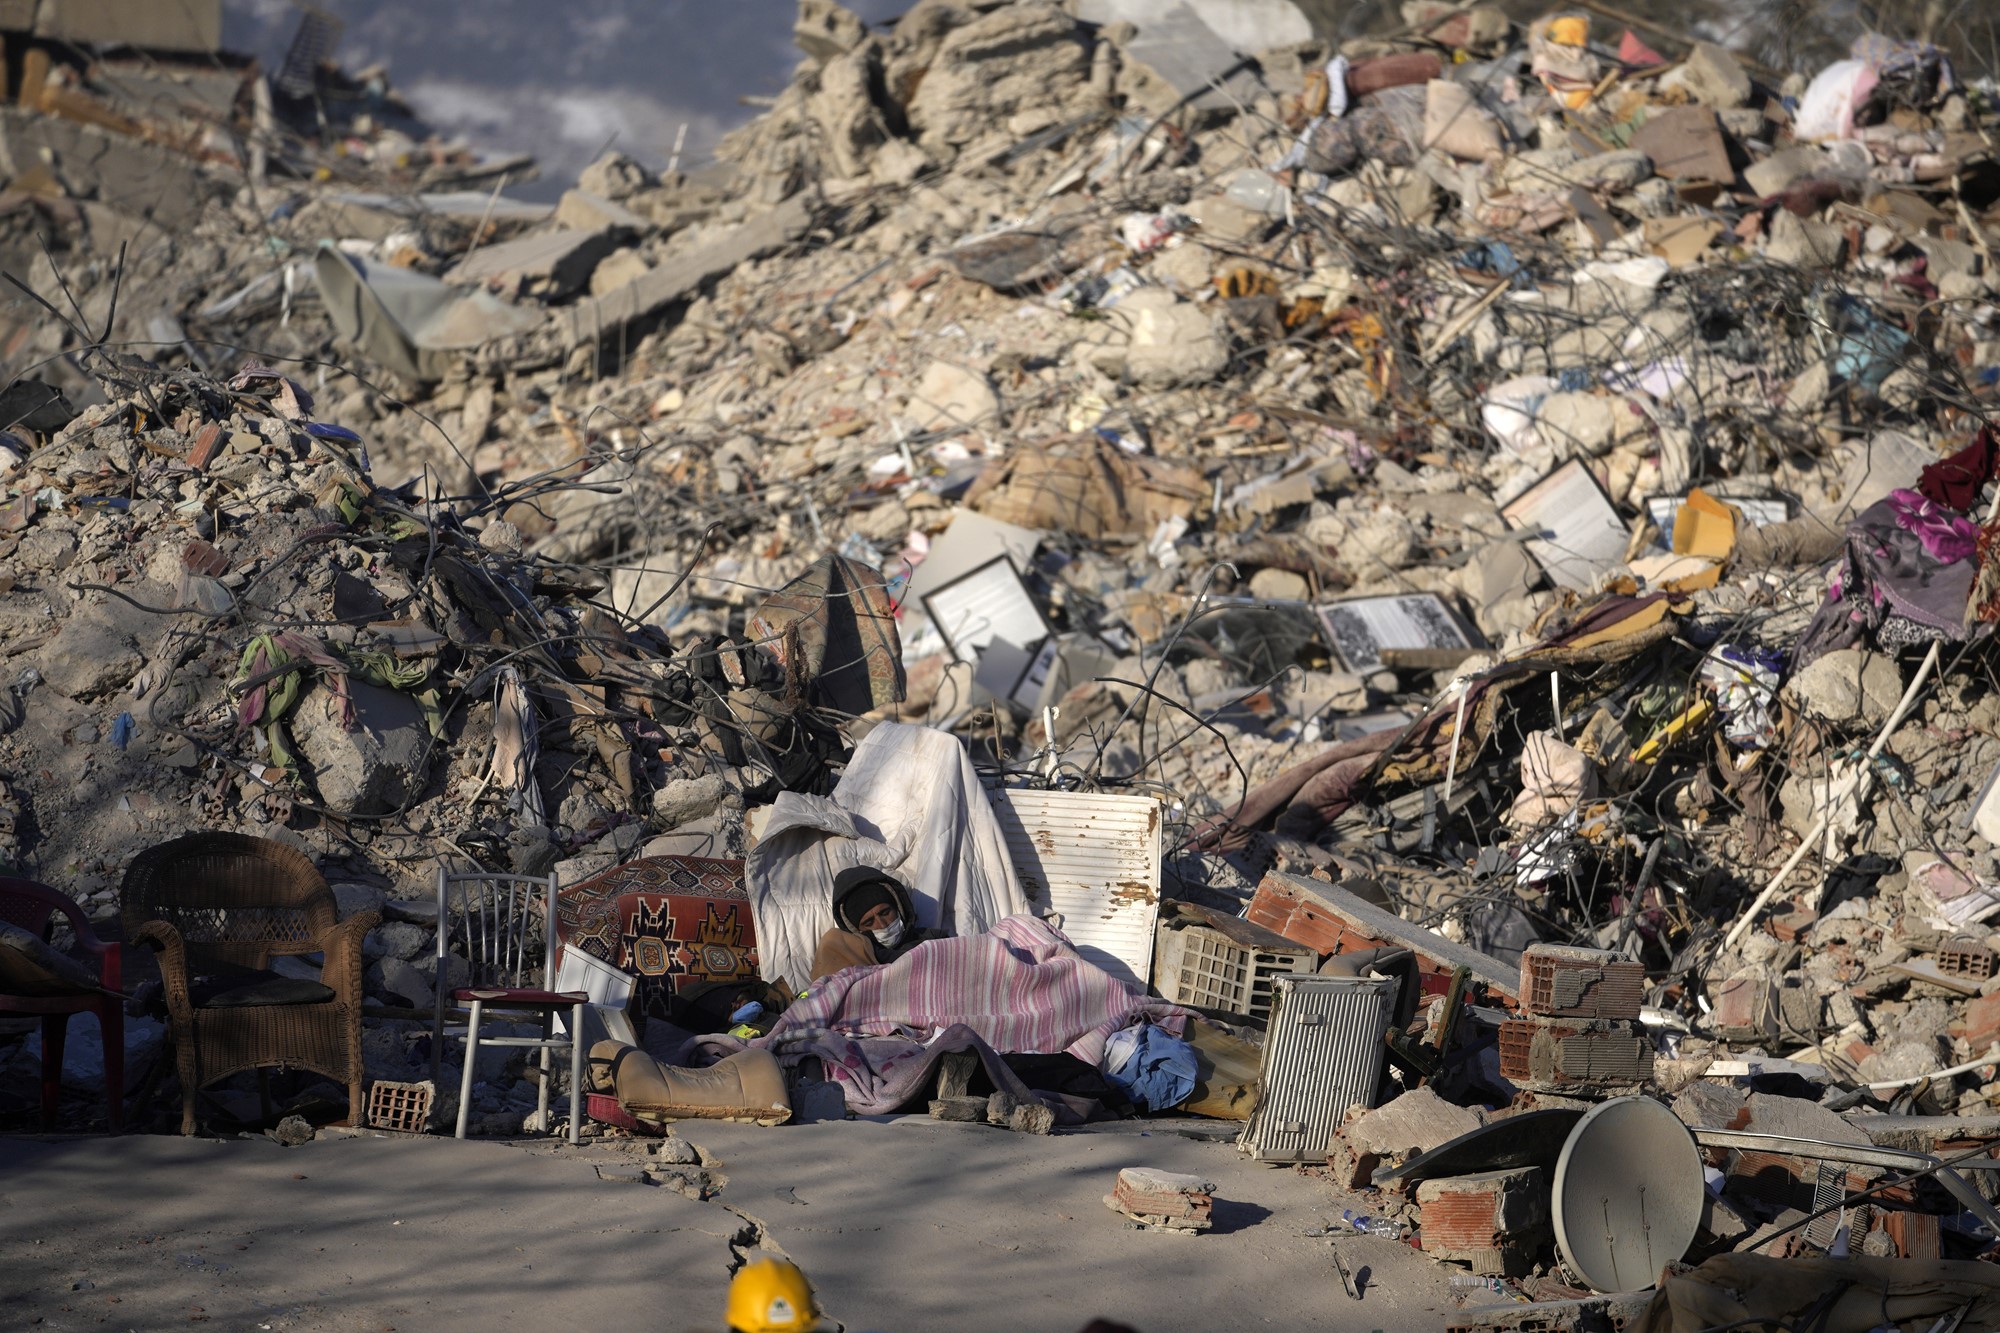 A person sleeps on the ground in front of a pile of rubble. 